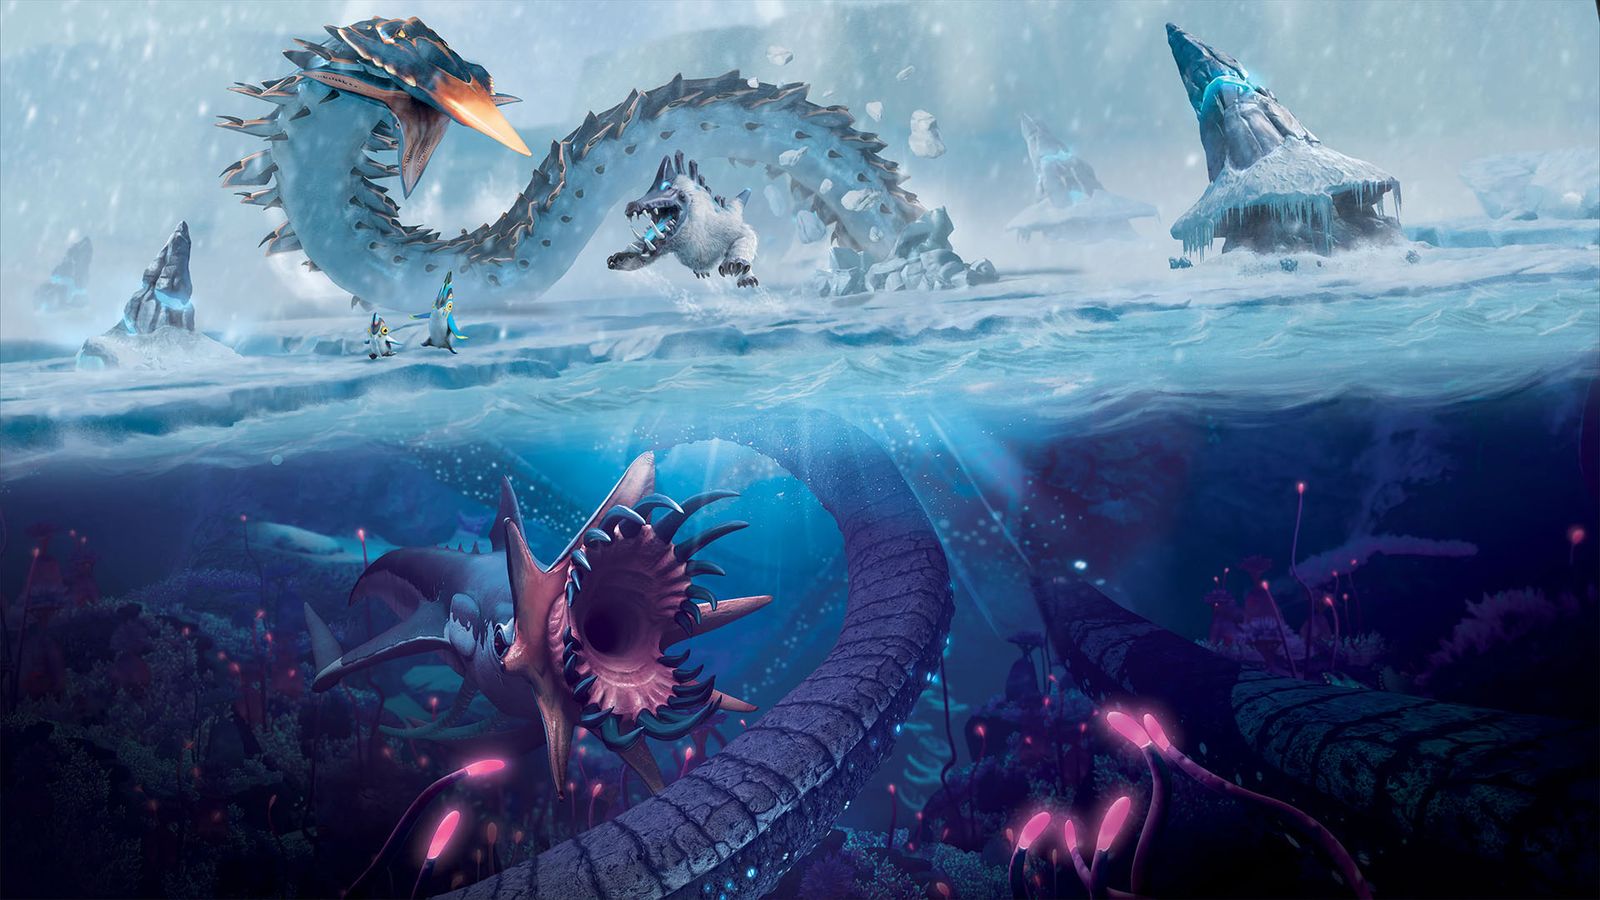 Subnautica monsters underwater and above surface